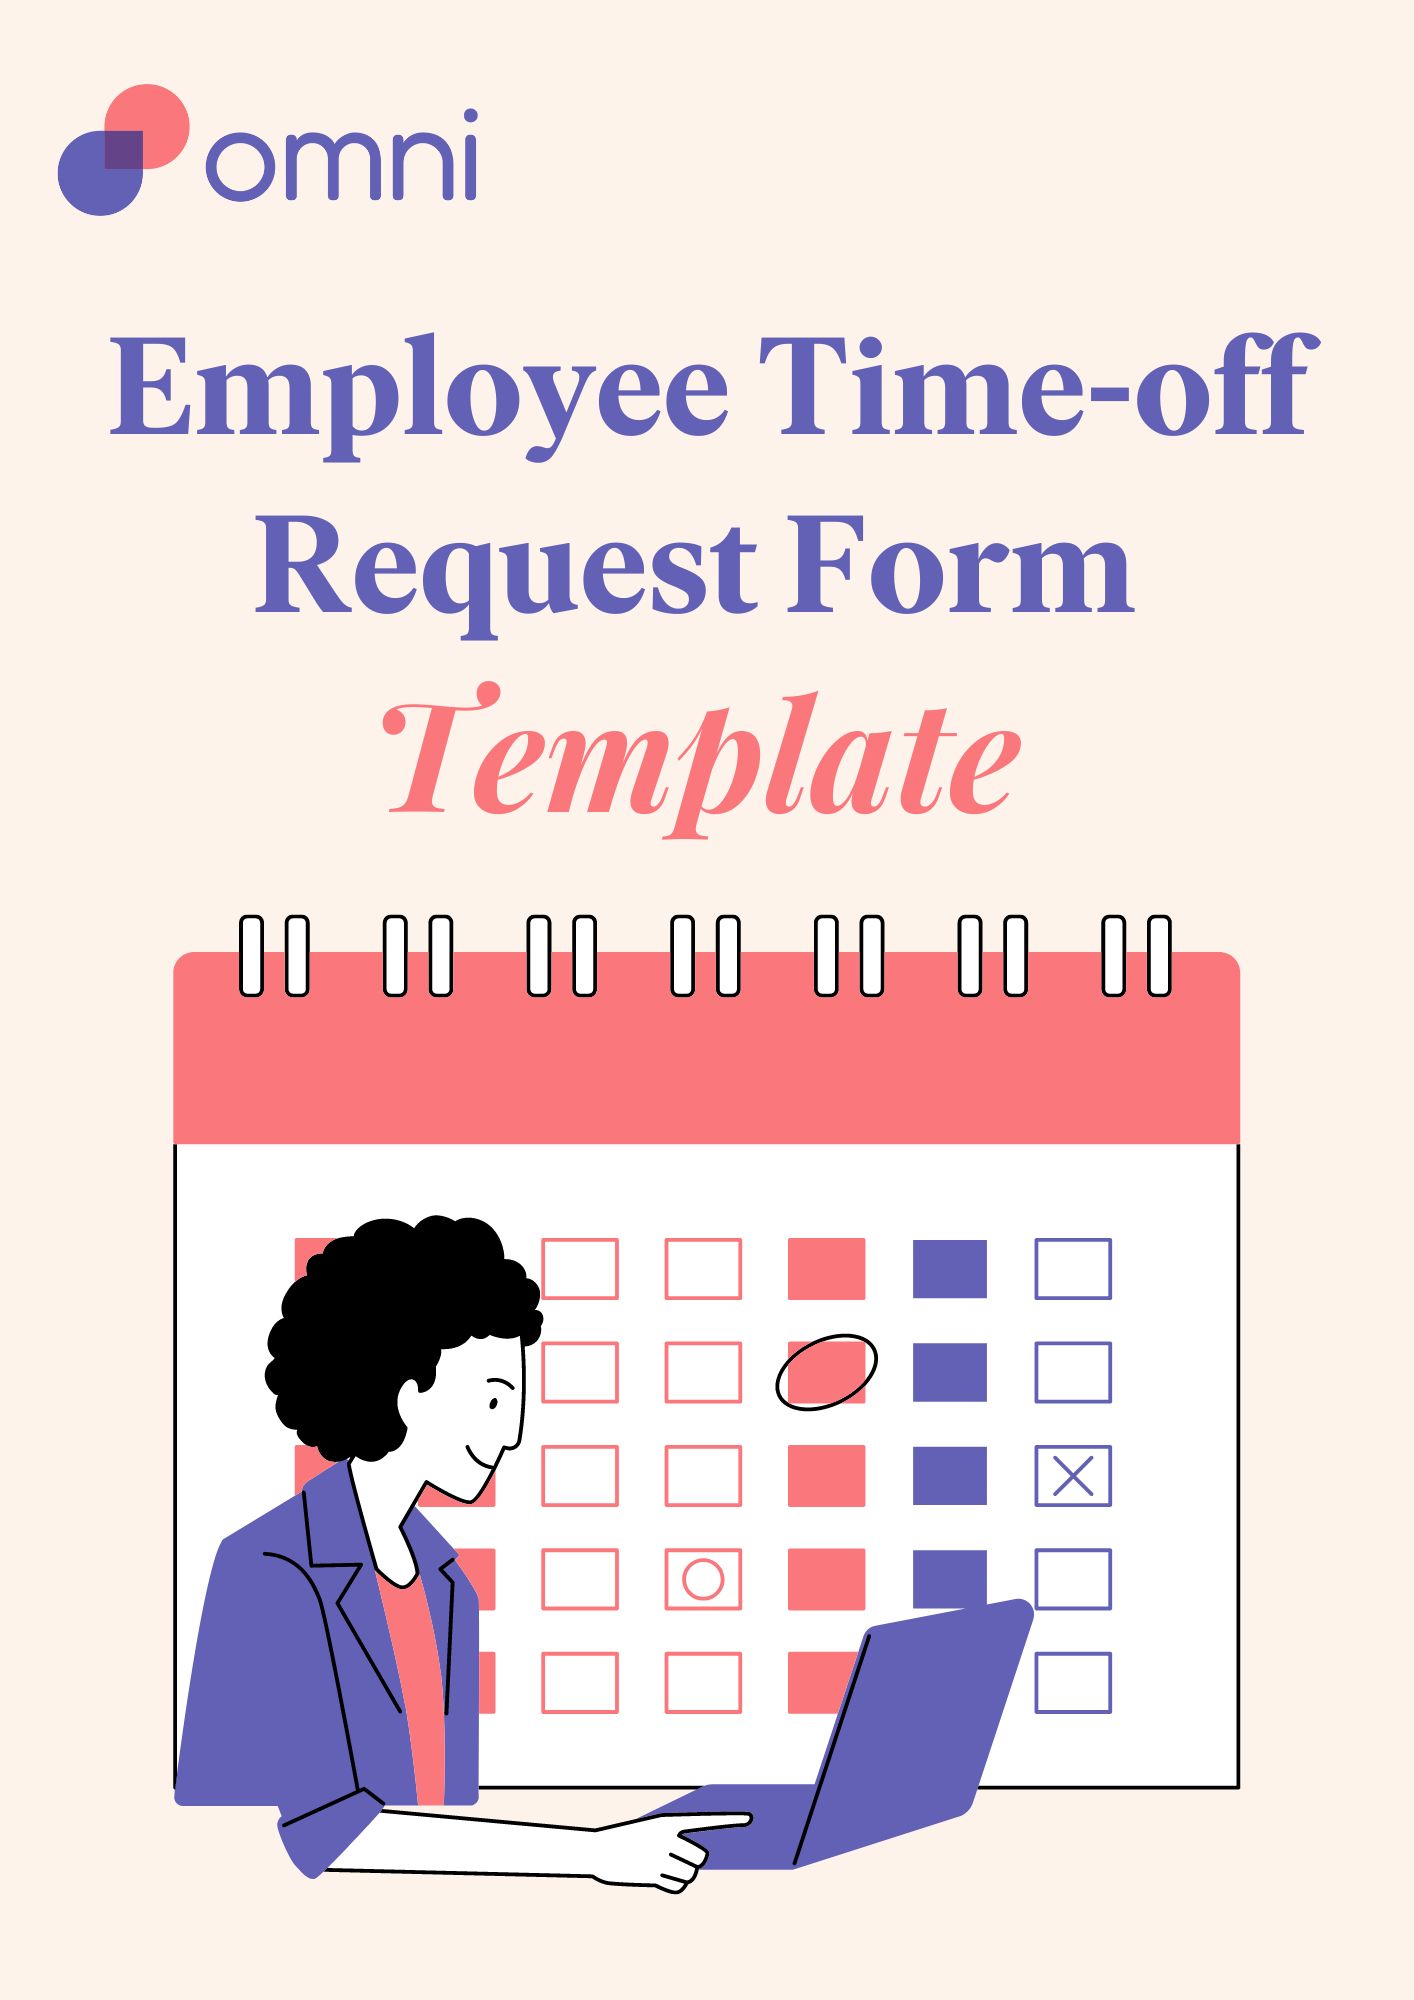 Employee Time-off Request Form Template